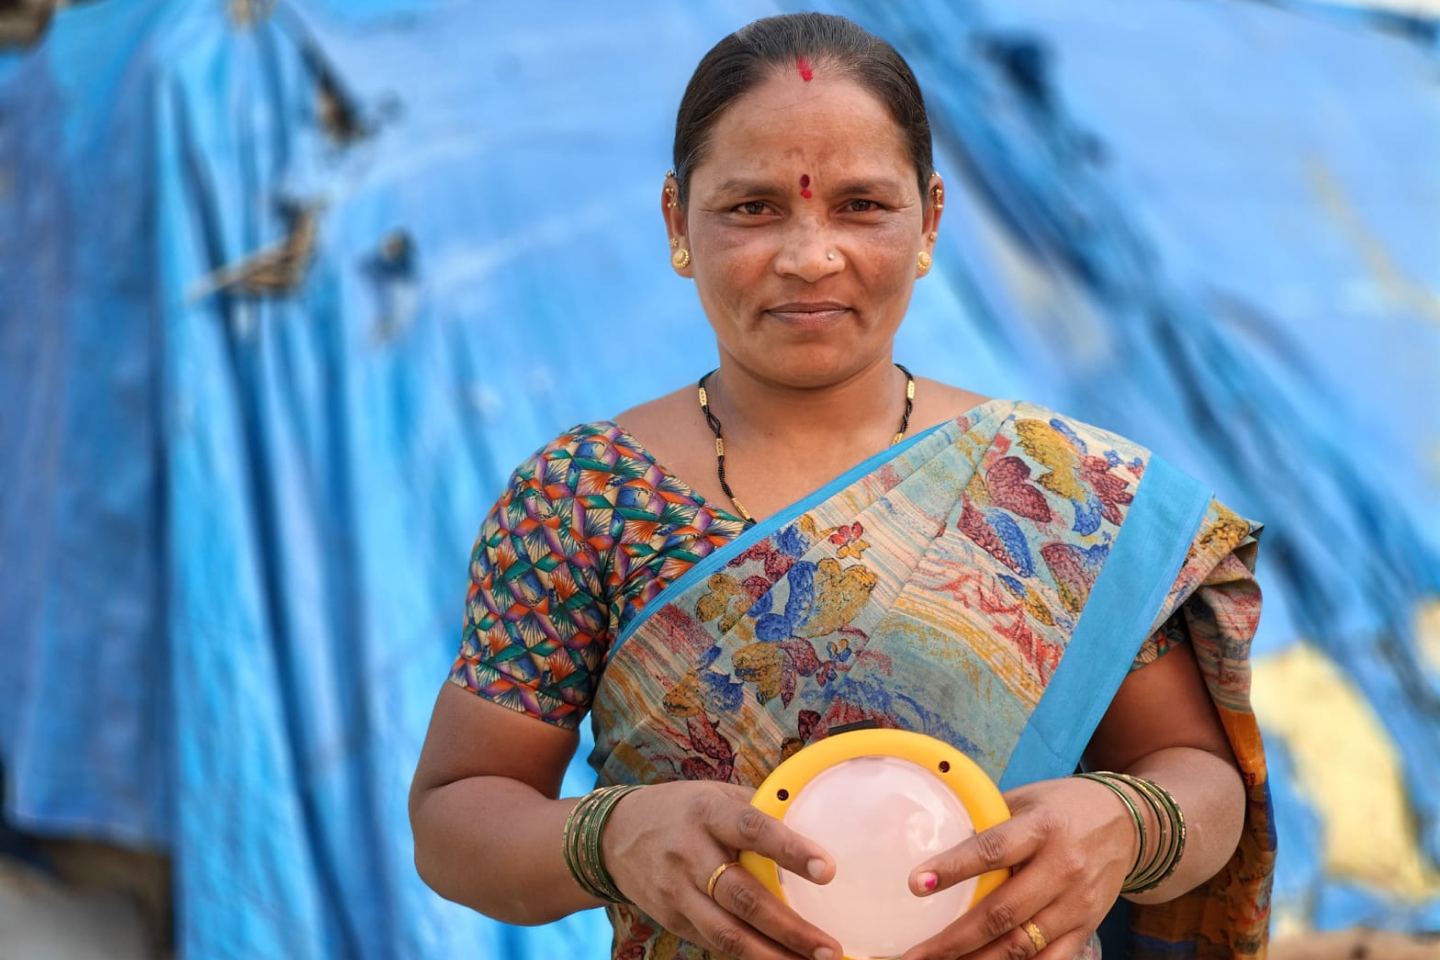 Woman in India who has received funding and support from Pollinate Group